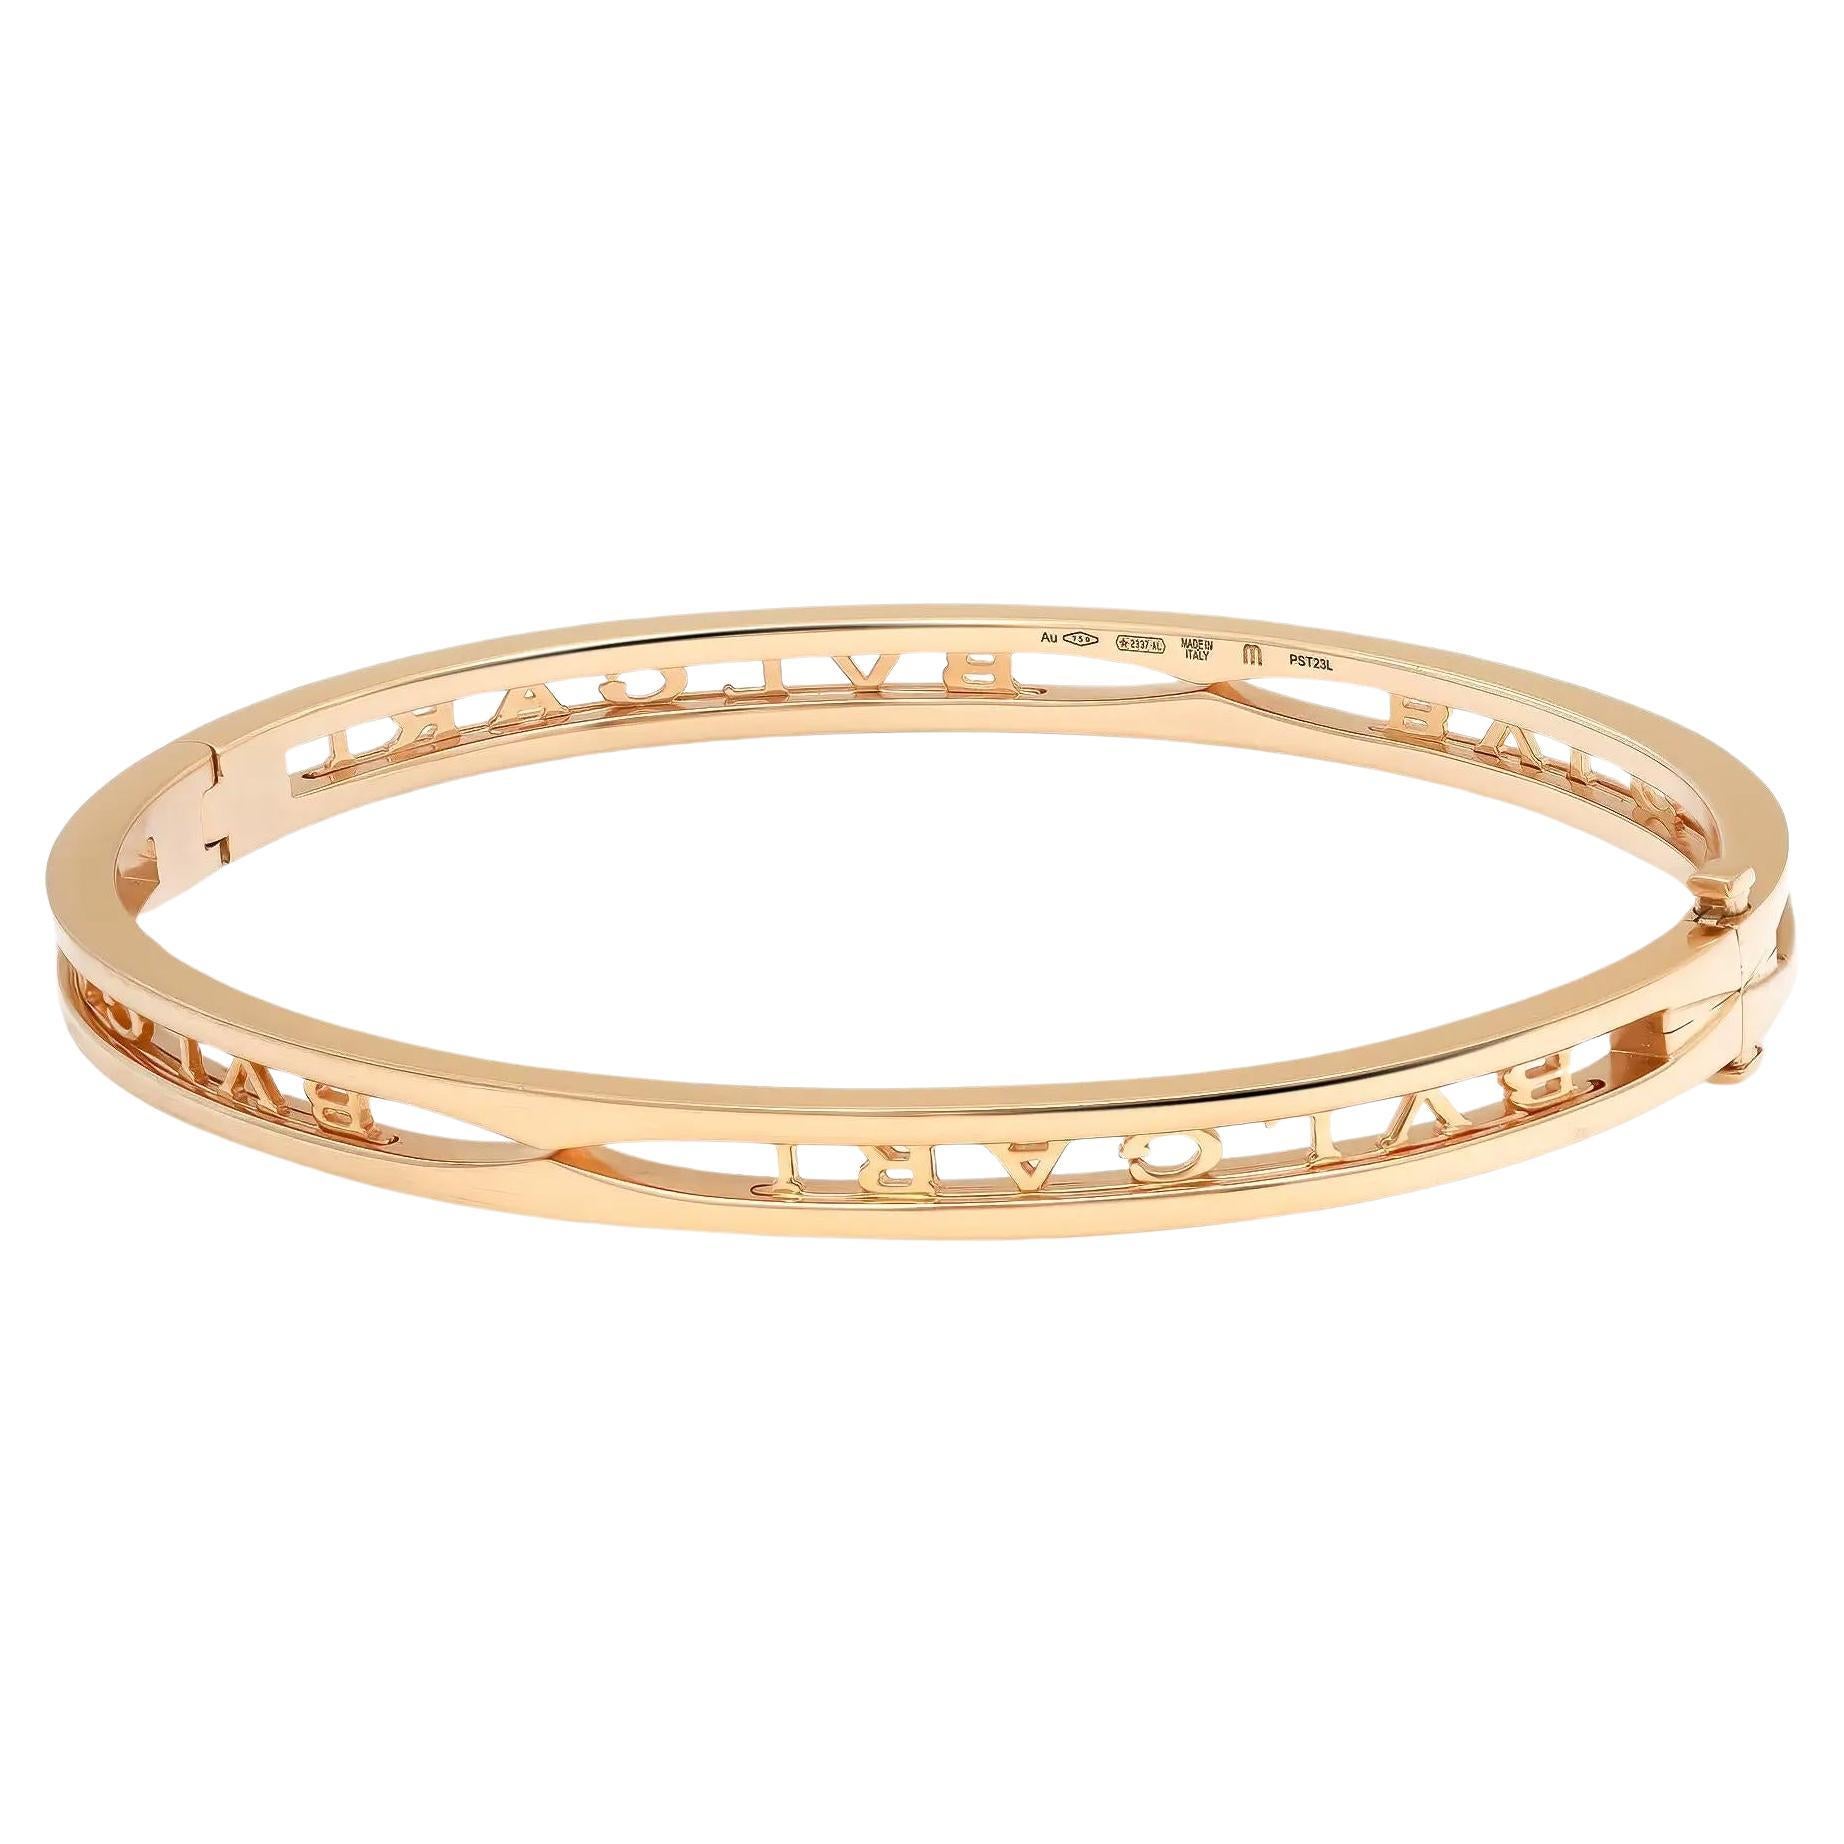 Bold and beautiful, this bracelet is a true essence of jewelry aesthetics. Crafted in lustrous 18K yellow gold. This bracelet features an oval-shaped bangle with the Bvlgari logo cut out. Super stackable and easy to wear. Size: Medium ( fits up to 7